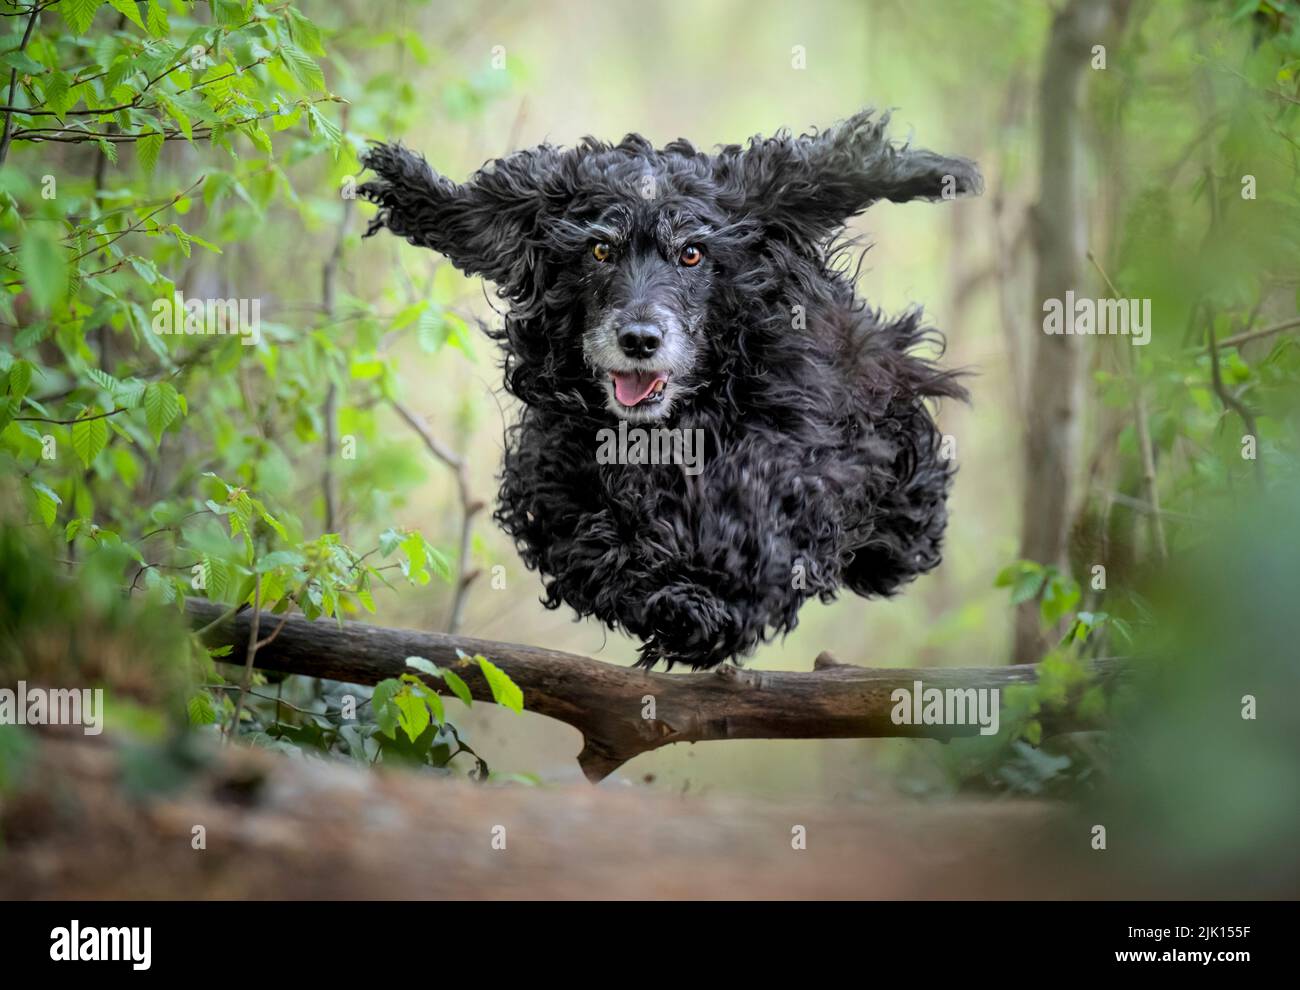 Black Cocker Spaniel dog running and jumping over a stick in the woods, Italy, Europe Stock Photo